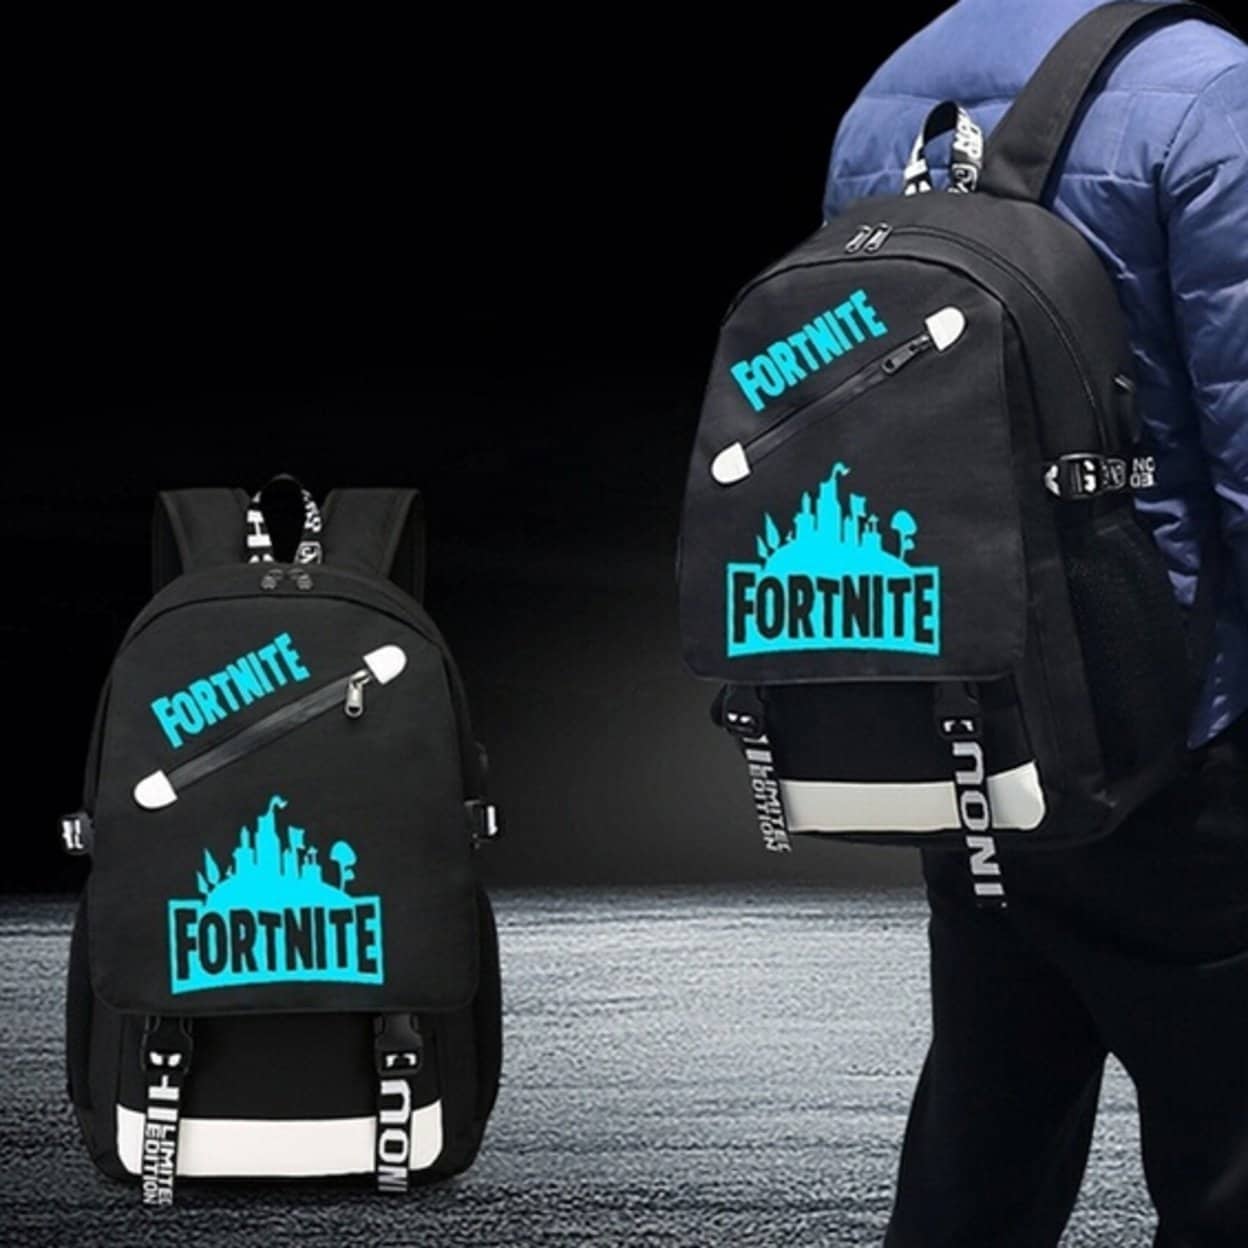 Shop Night Light Fortnite Backpack With Usb Charger School Bags Overstock 27518384 - 9 designs fortnite and roblox game night light backpacks with usb charger boys and girls canvas school bag bookbag satchel youth casual campus bags